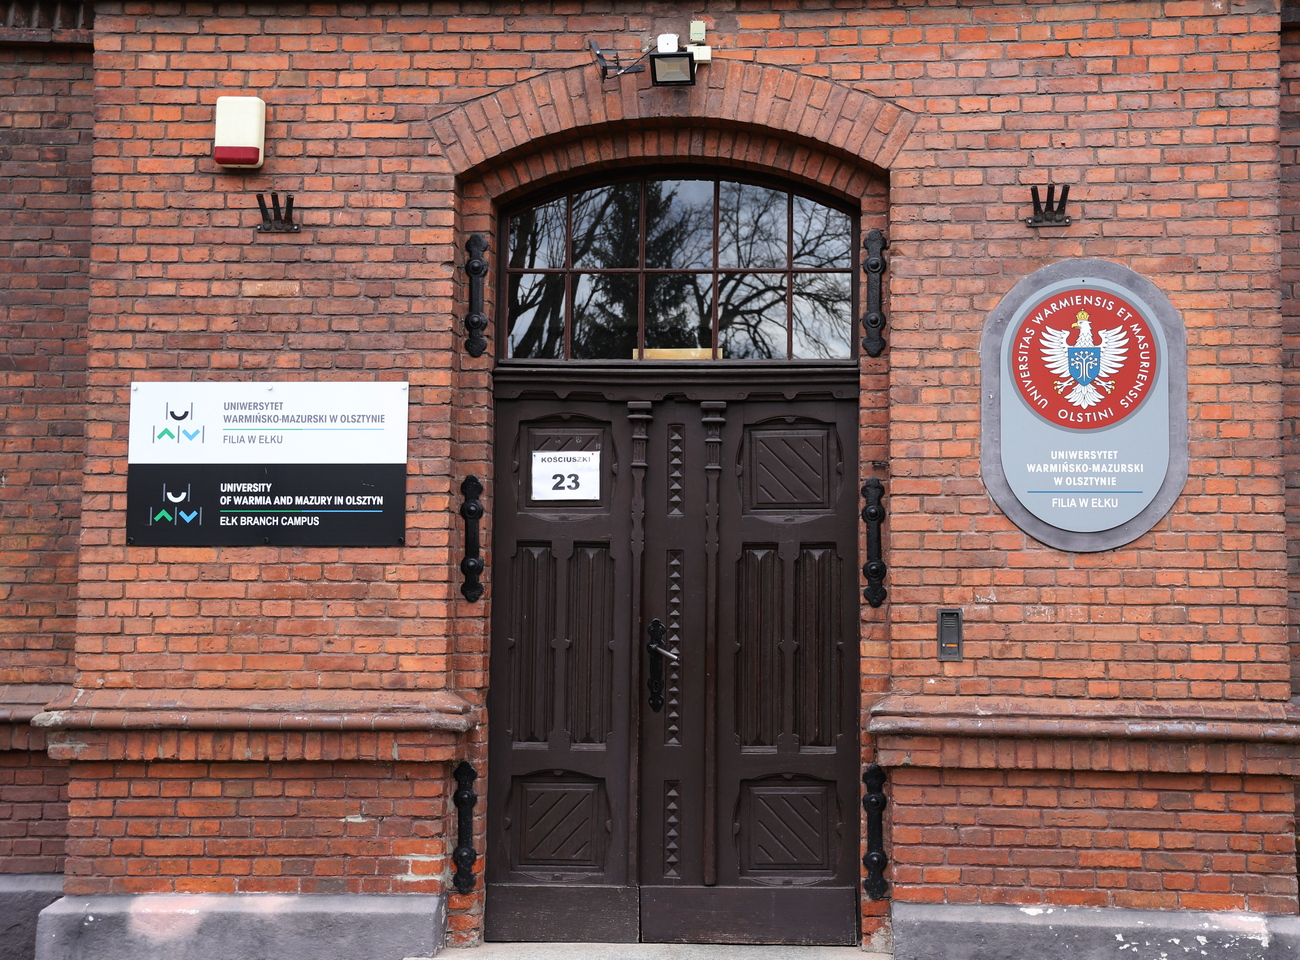 Internal security at the Ełk branch of the UWM with distinction